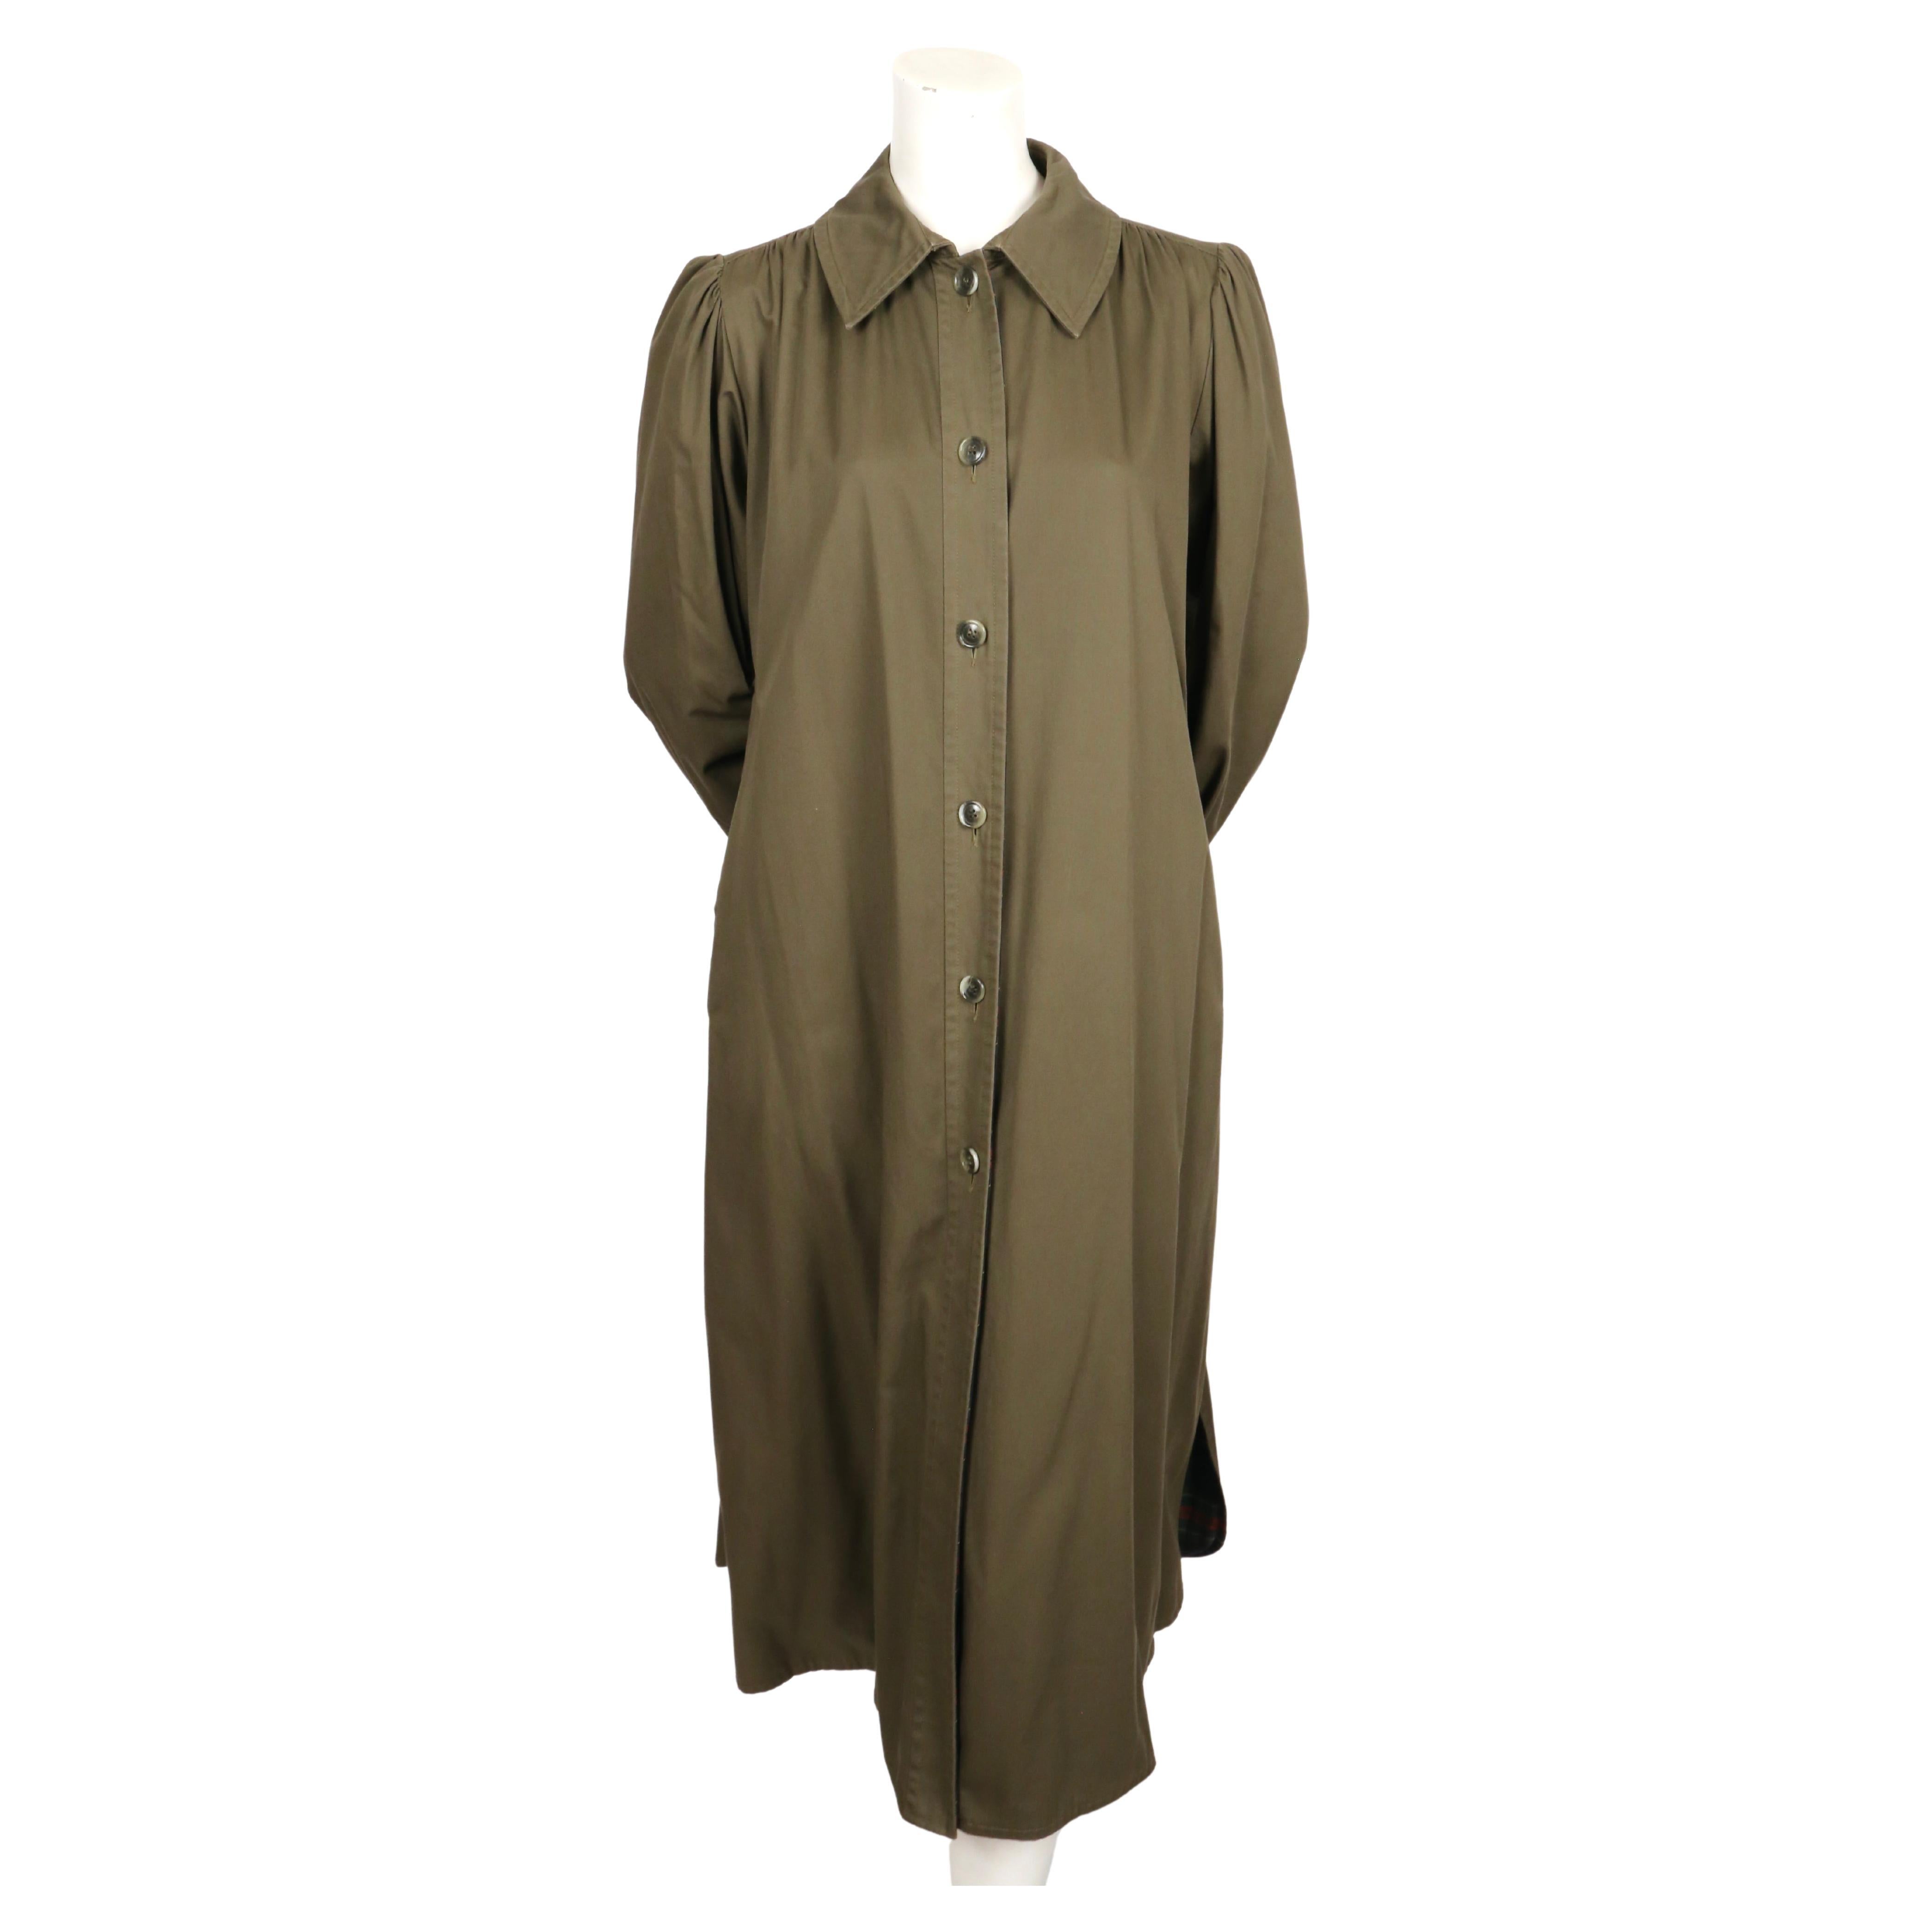 Classic, army-green, cotton trench coat with puff sleeves and plaid lining designed by Yves Saint Laurent dating to the 1970's. No size is indicated however this will best fit a US 6-10.   Approximate measurements: shoulder 14,5